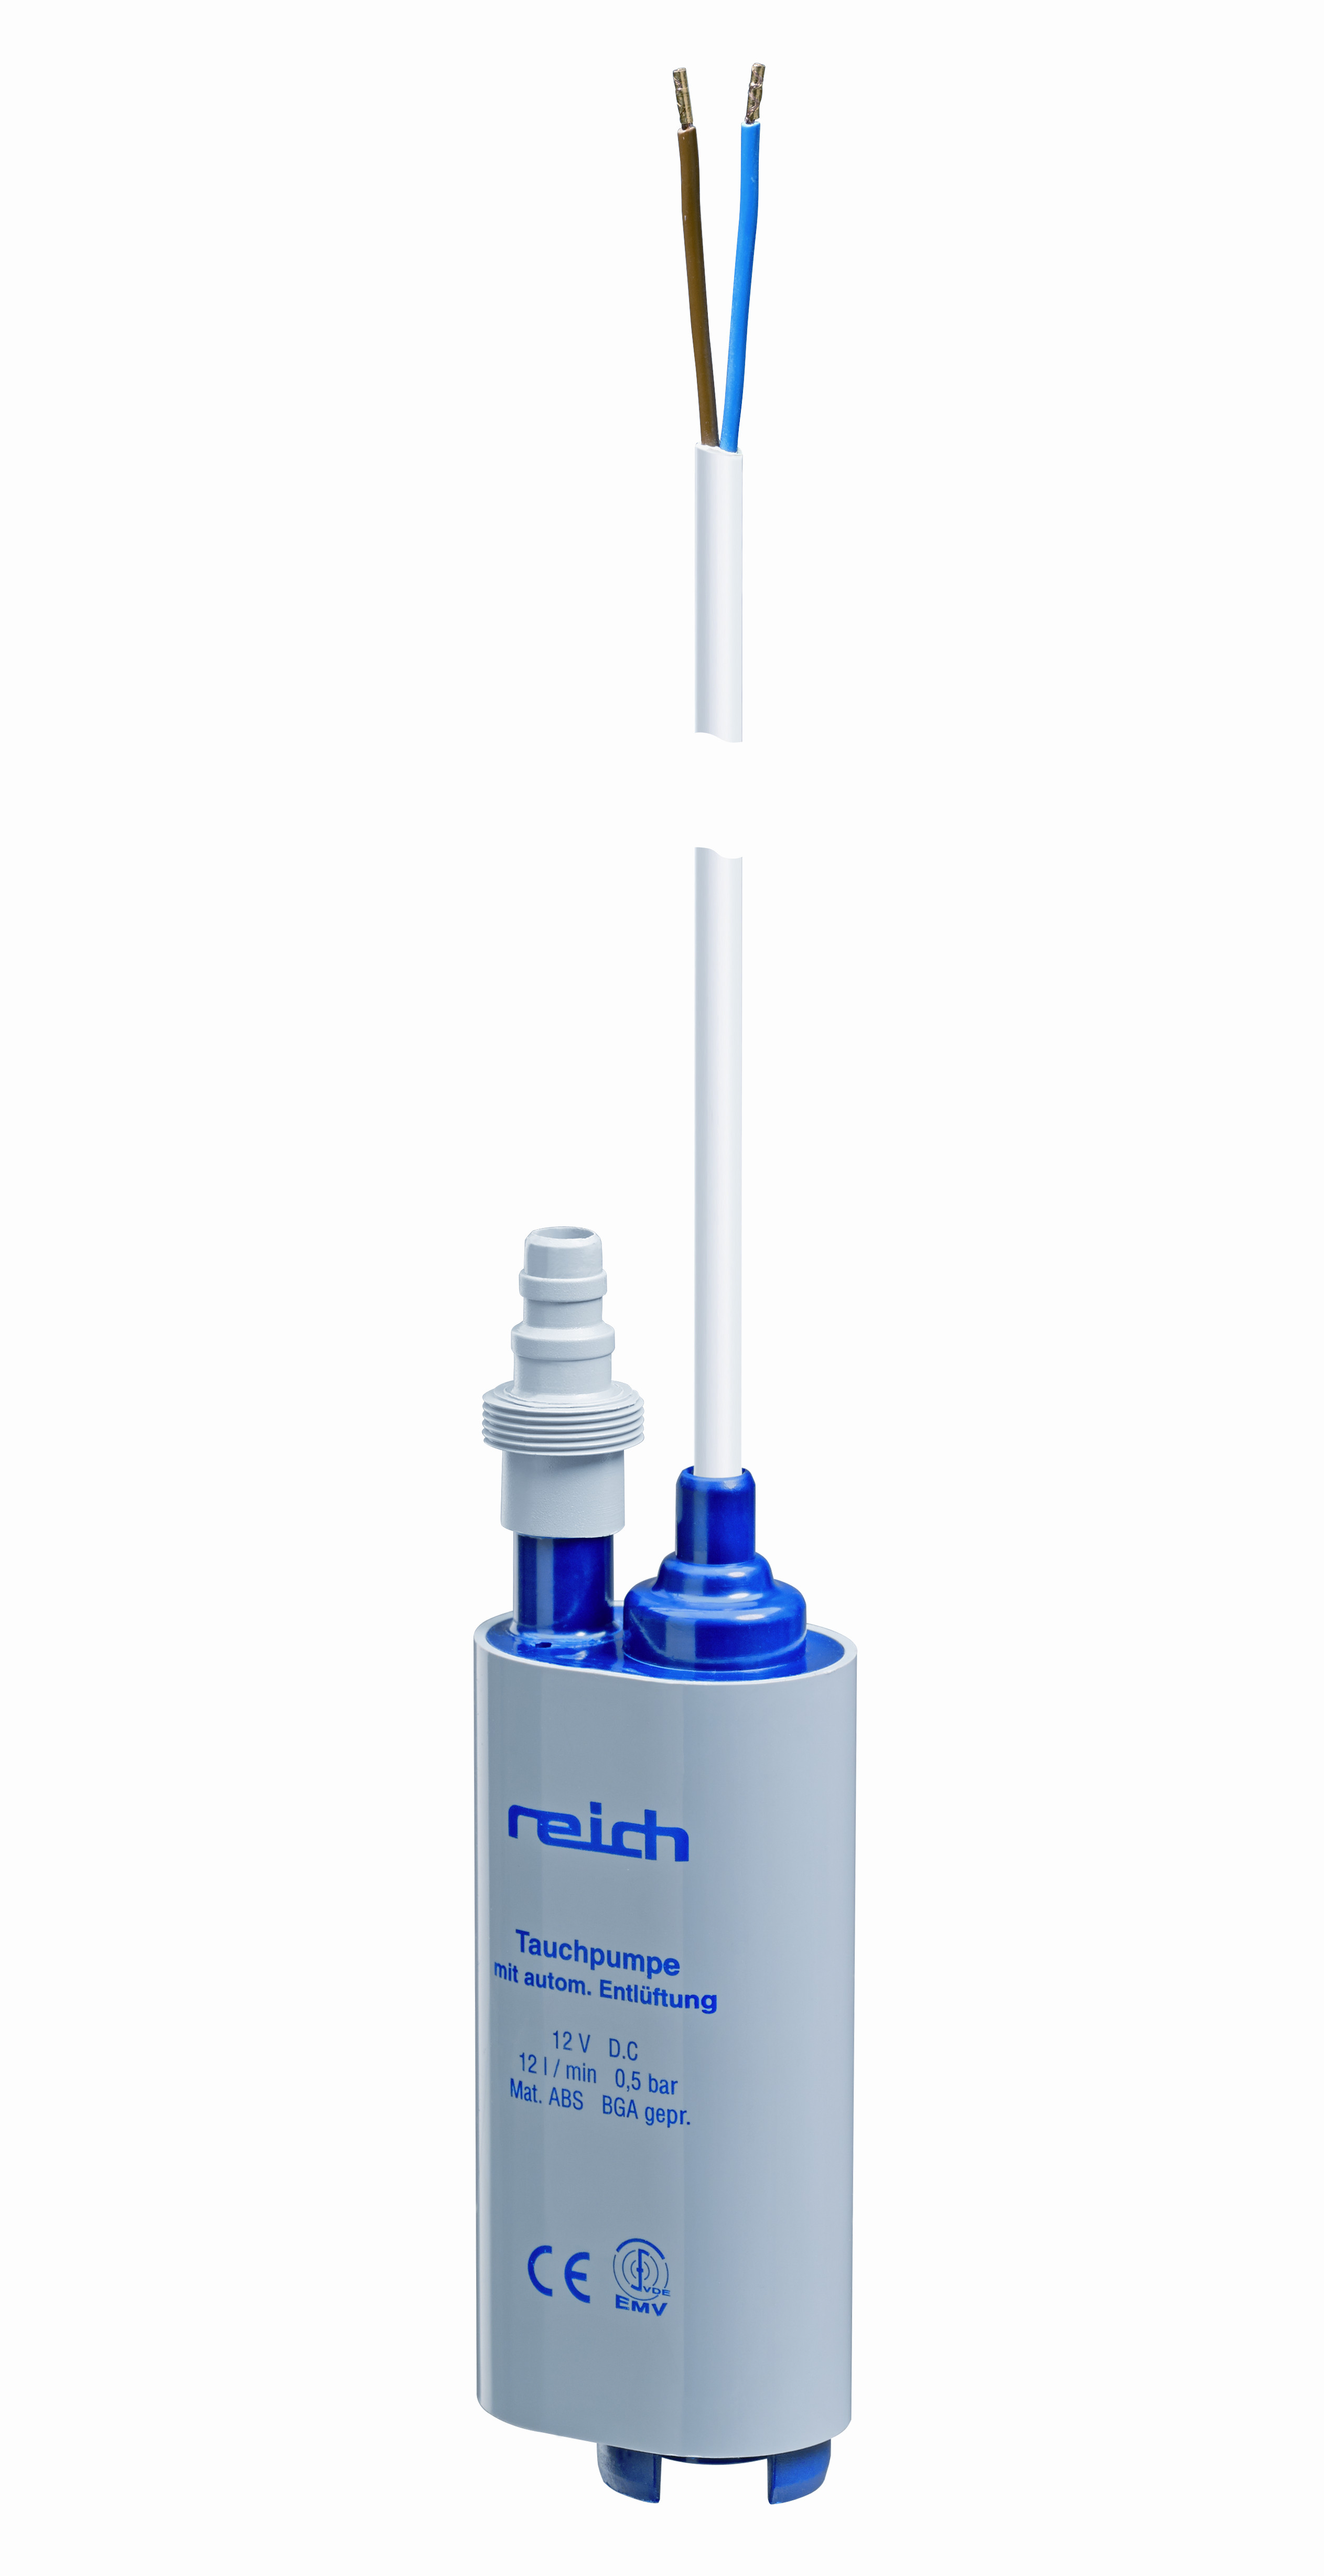 Reich Power-Pump, 12 Liter, 0.6 bar, with autom. deaeration and check valve